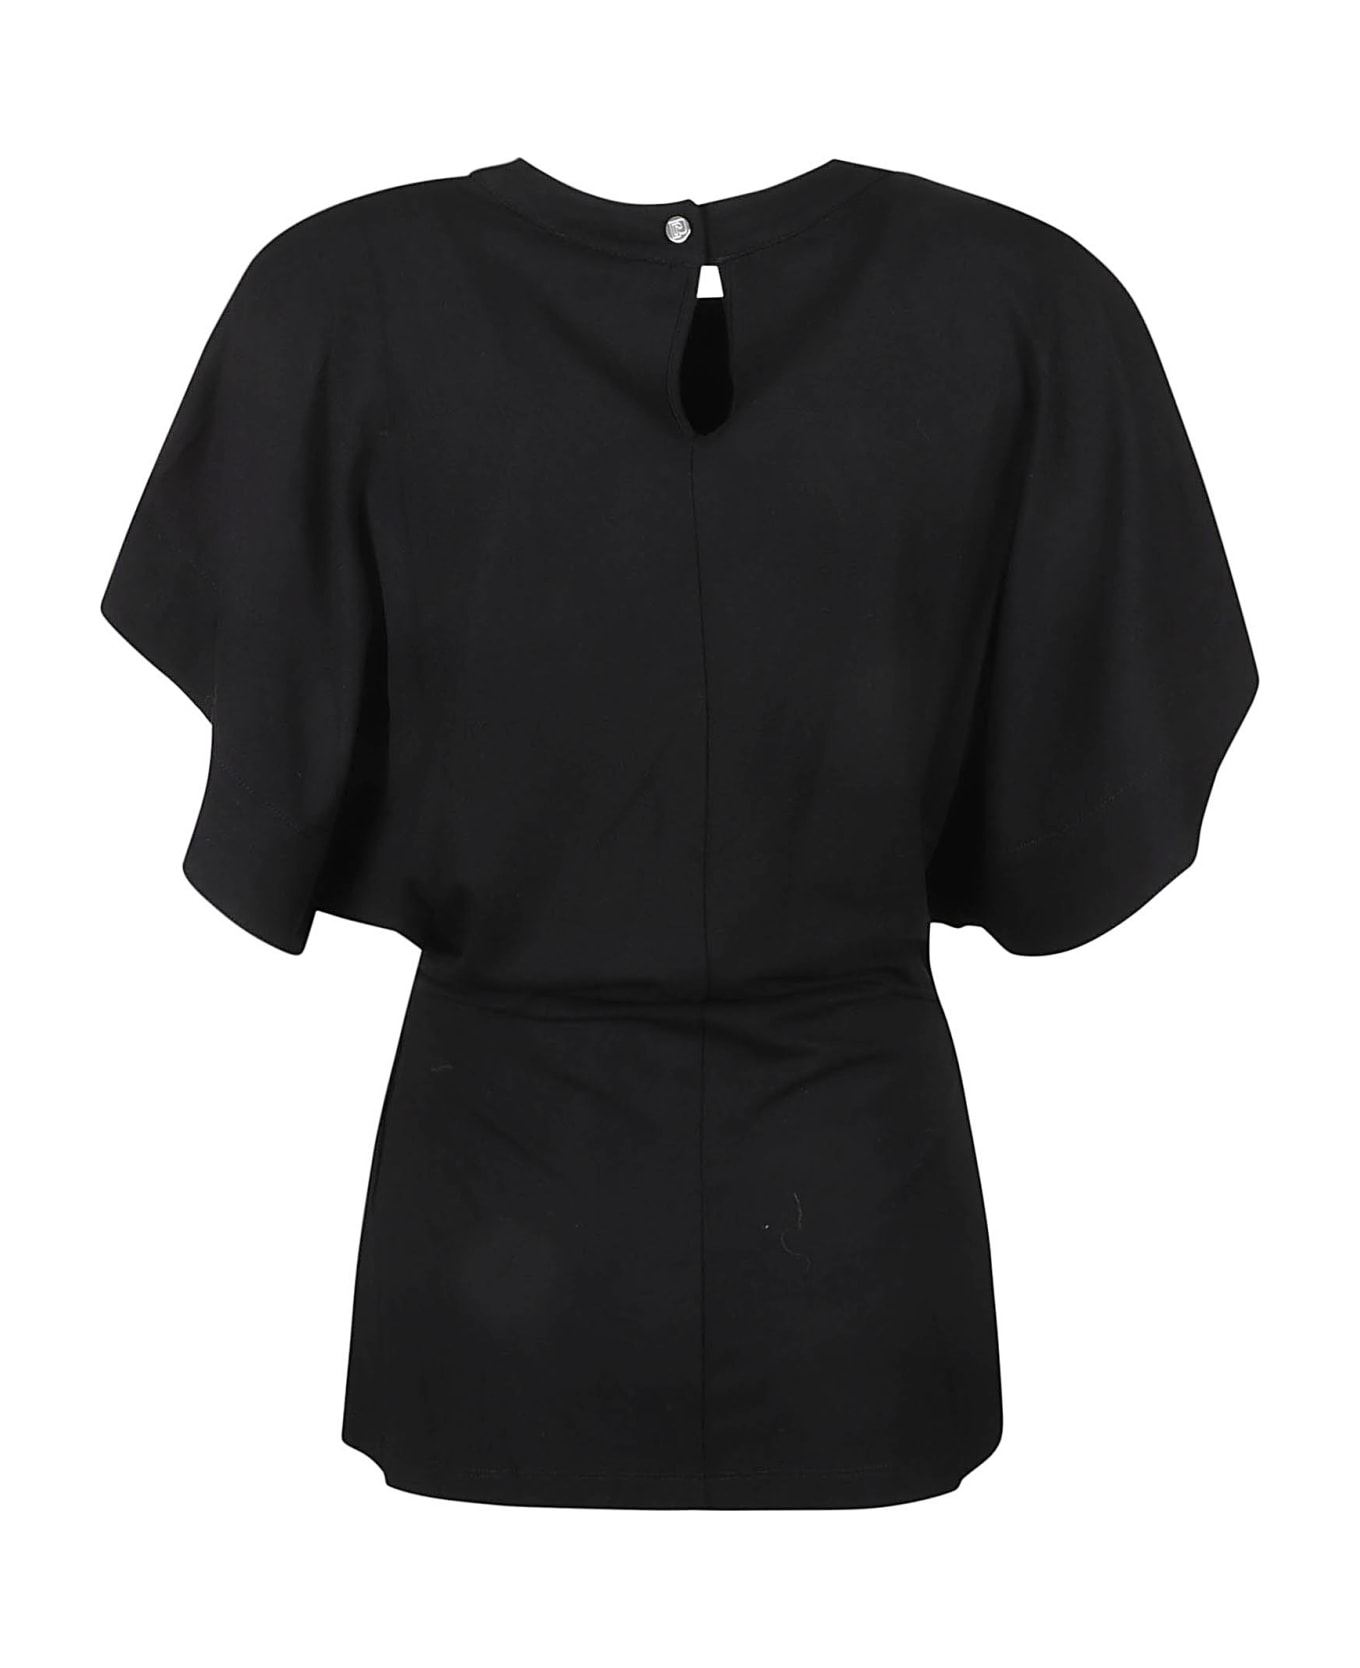 Paco Rabanne Wrap Buttoned Top - Black